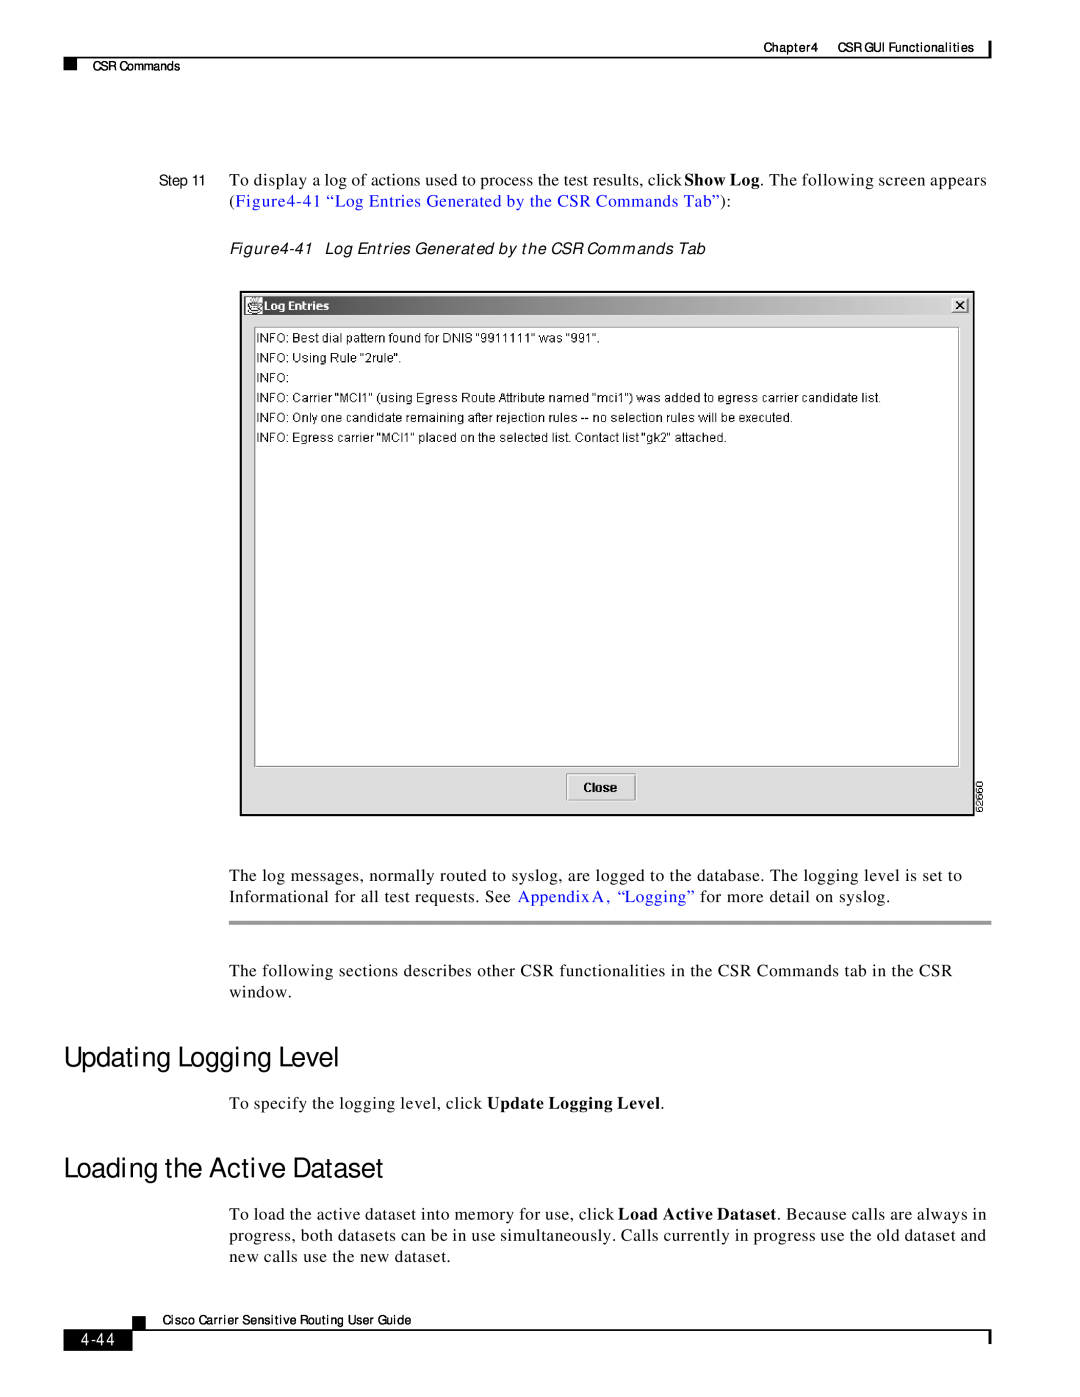 Cisco Systems Version 1.1 manual Updating Logging Level, Loading the Active Dataset, 4-44 